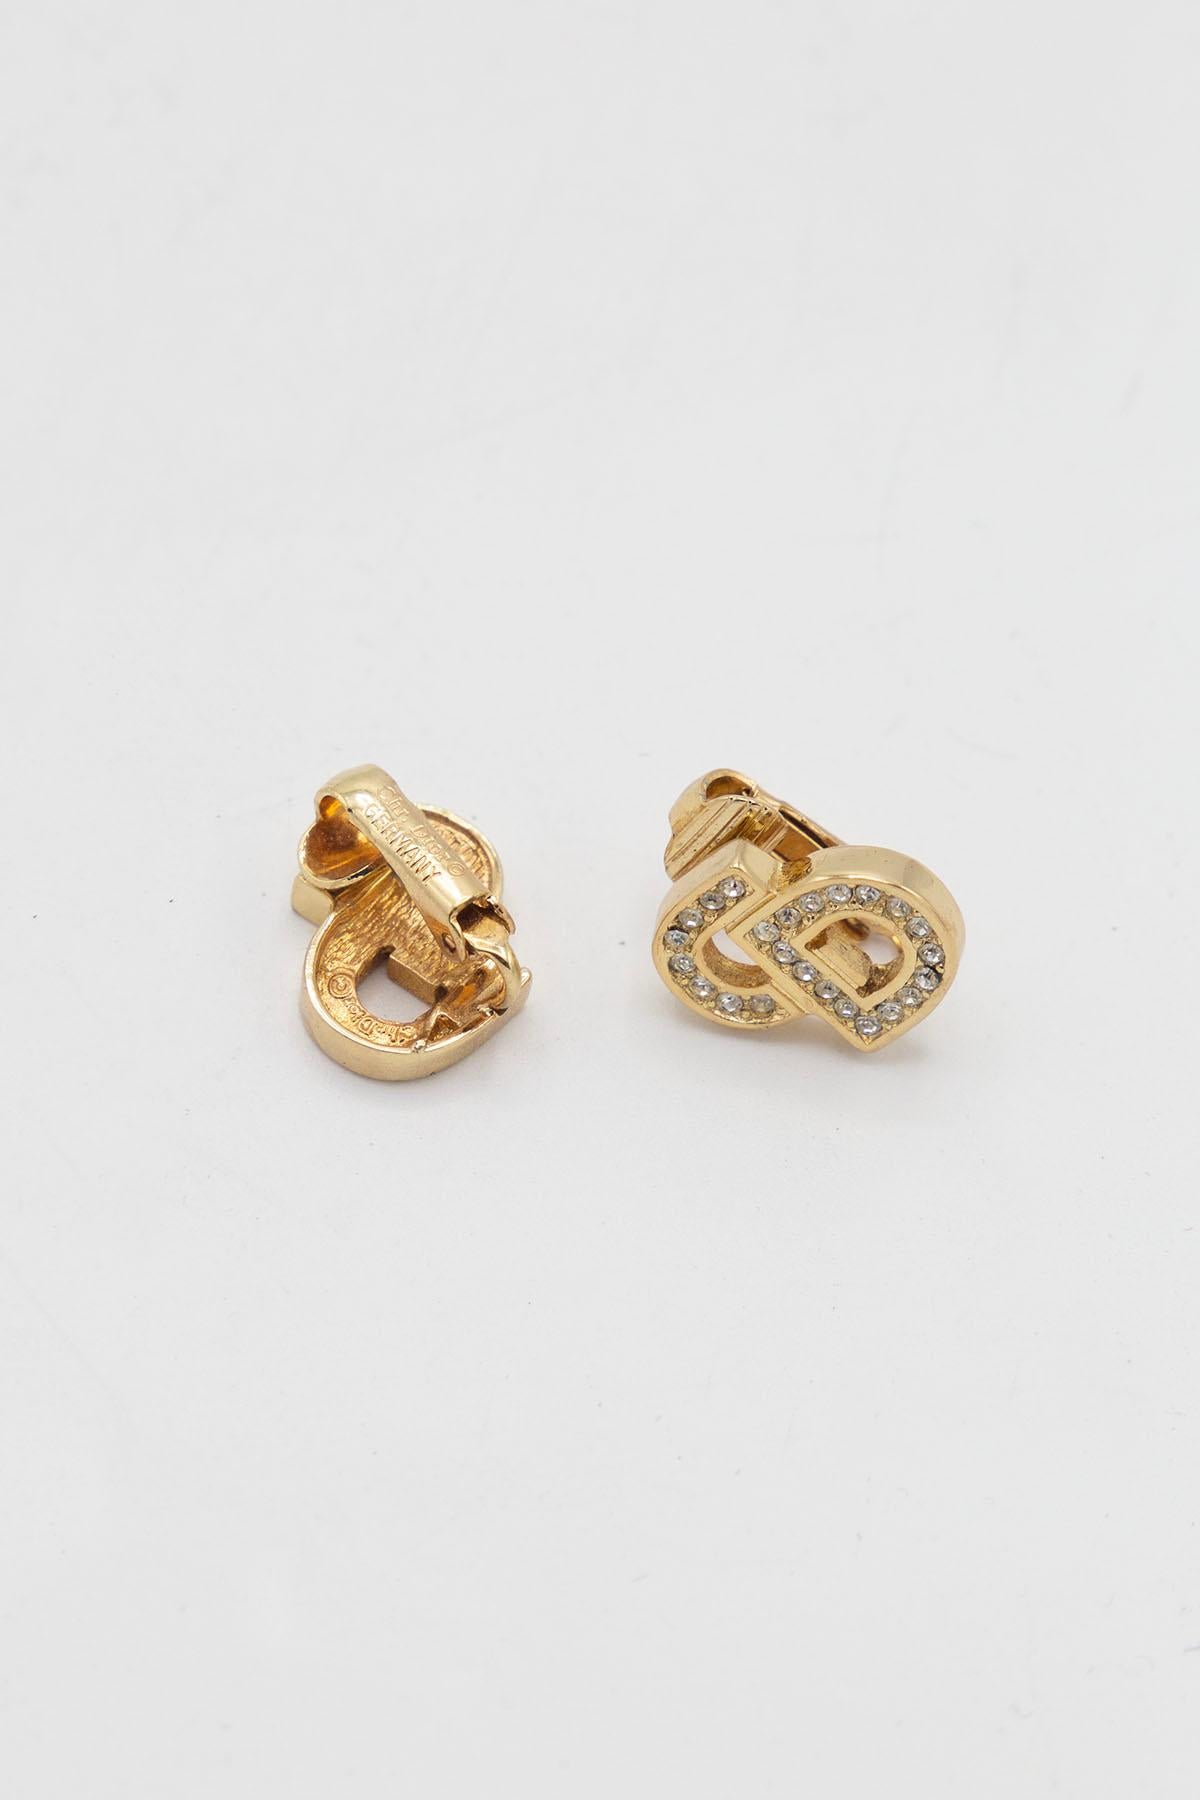 Rare pair of elegant EAR CLIPS drawing the iconic Maison DIOR Monogram (CD) - VINTAGE model from the 1980 collection. Ultra refined, dress a result of OXIDE ZIRCONIUM and divinely symbolizes French elegance.
The 